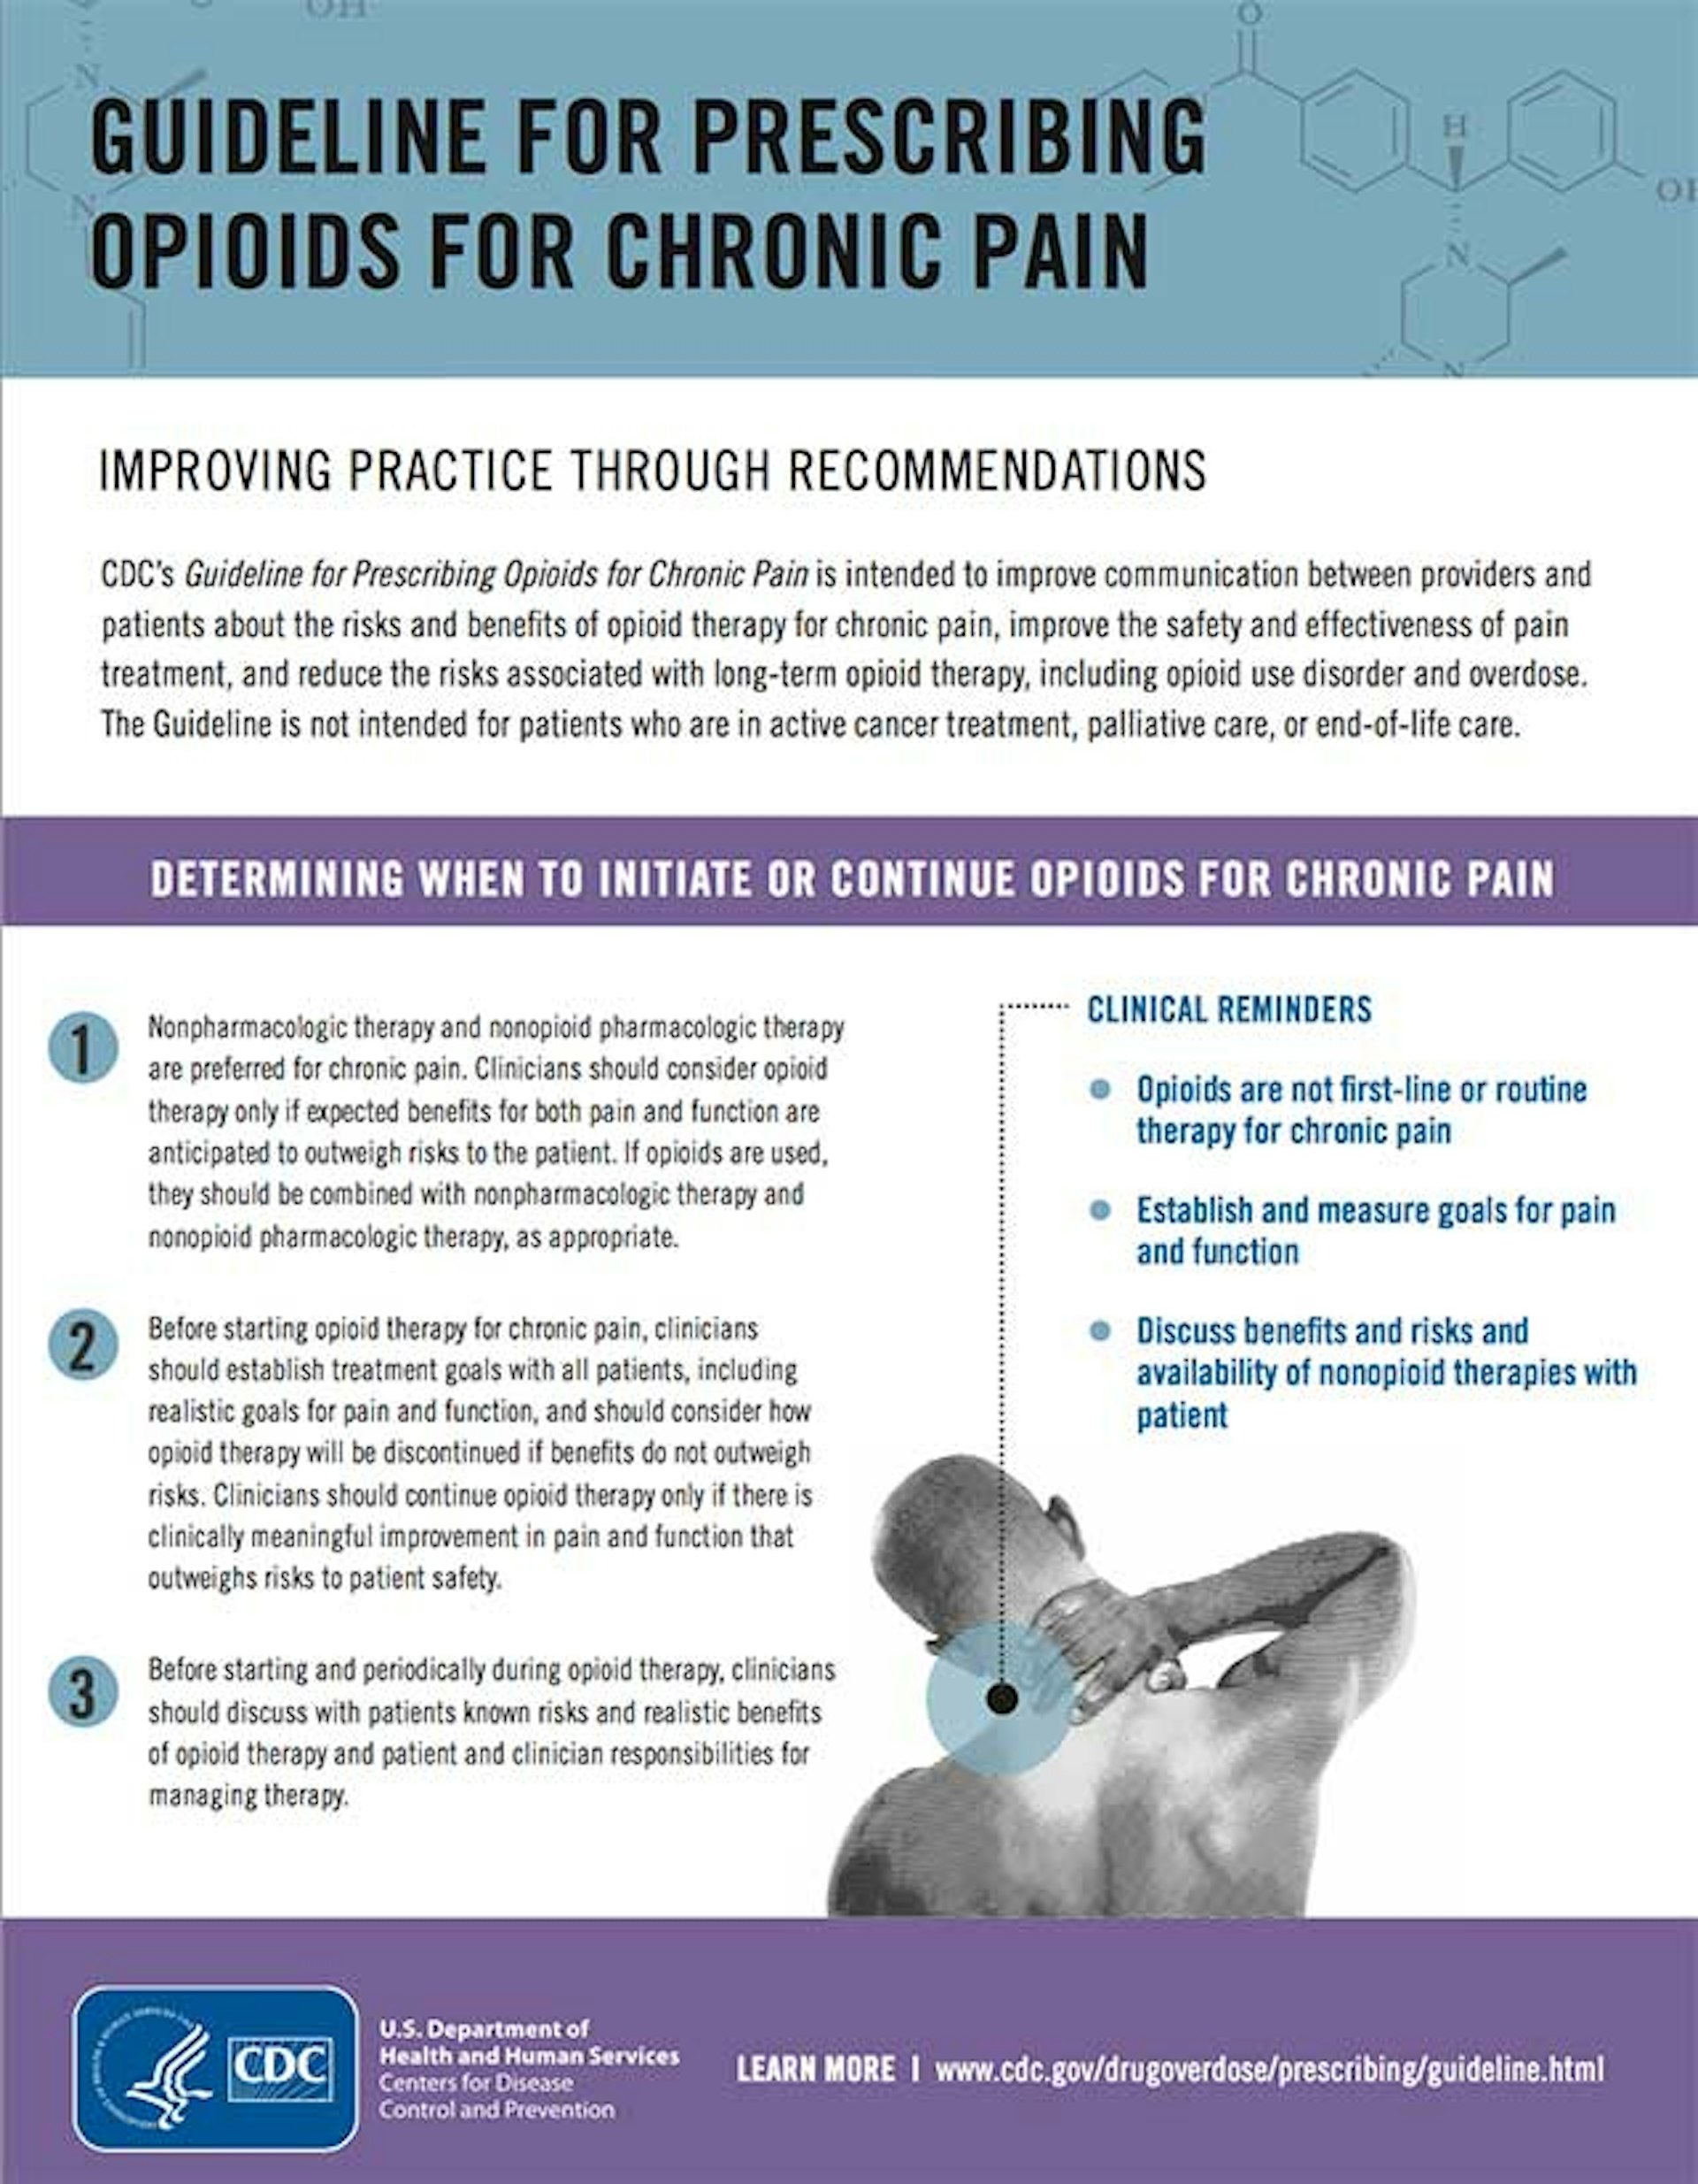 CDC Guidelines for Prescribing Opioids for Chronic Pain